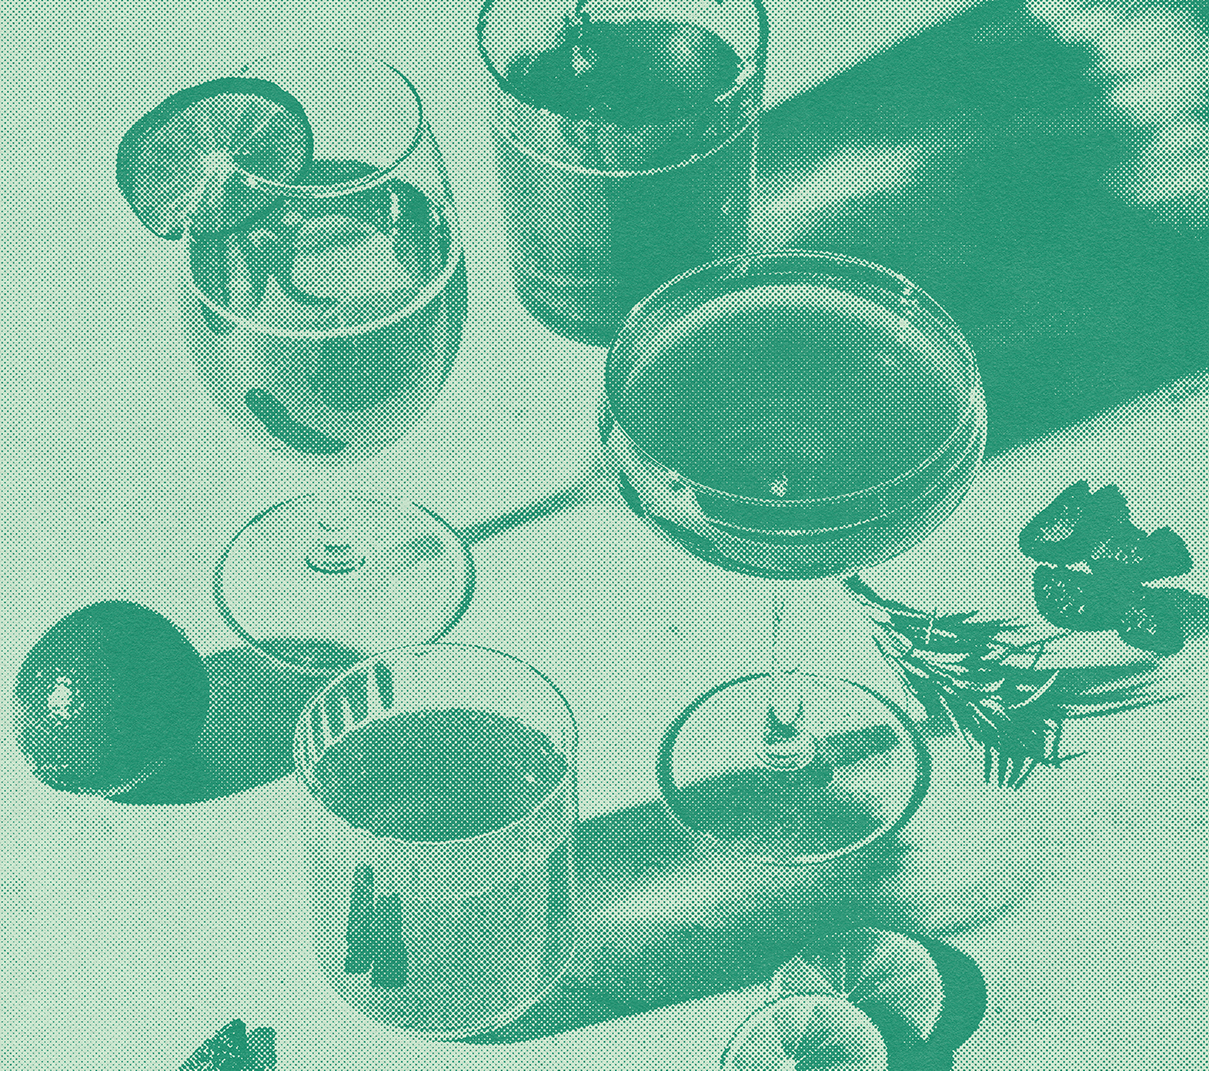 Halftone image of cocktails in mint and teal